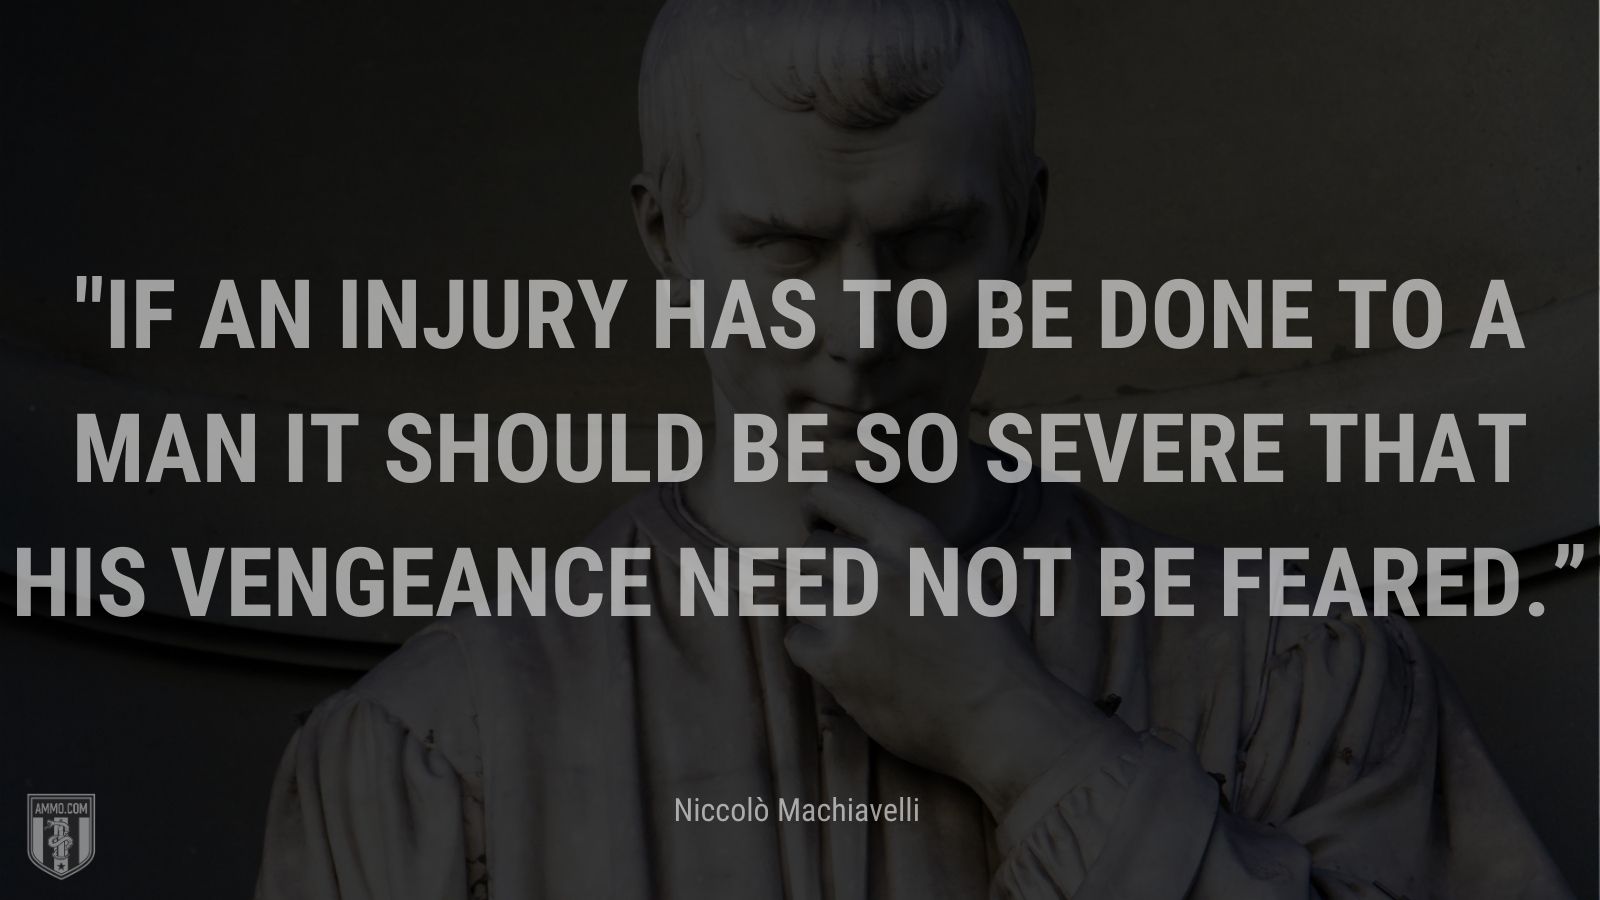 “If an injury has to be done to a man it should be so severe that his vengeance need not be feared.” - Niccolò Machiavelli